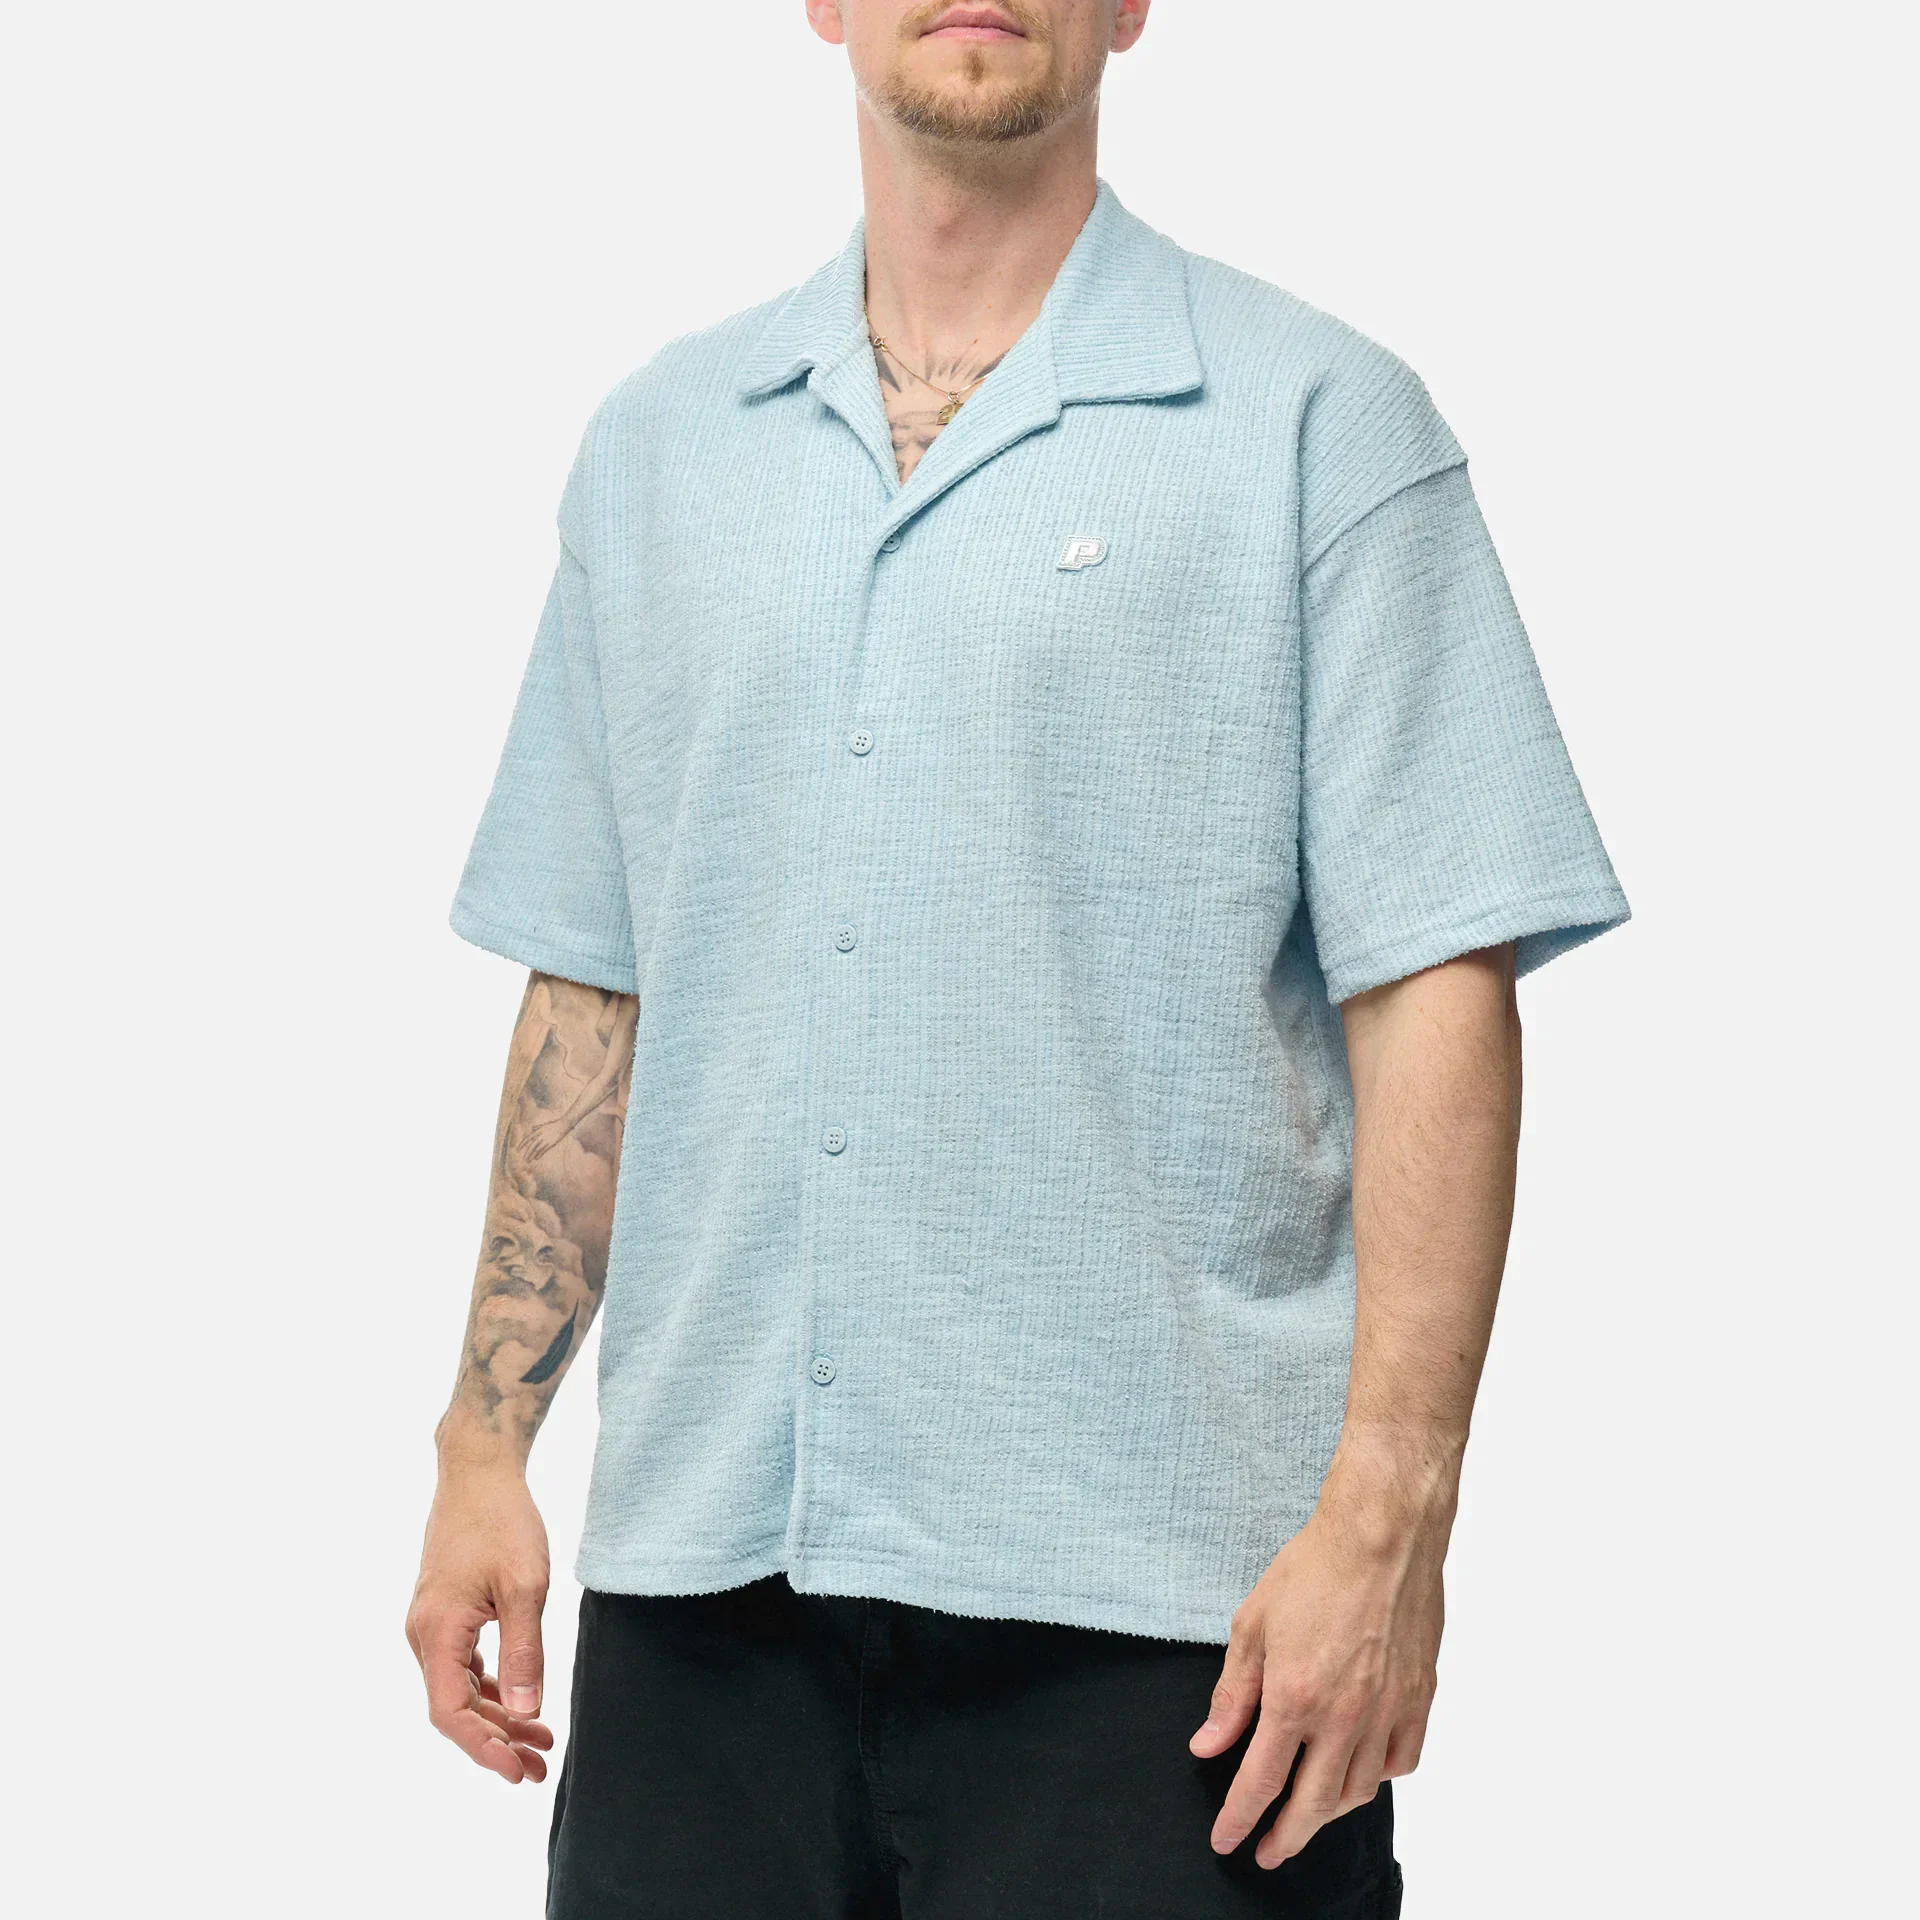 PEGADOR Libco Structured Knit Shirt Baby Blue